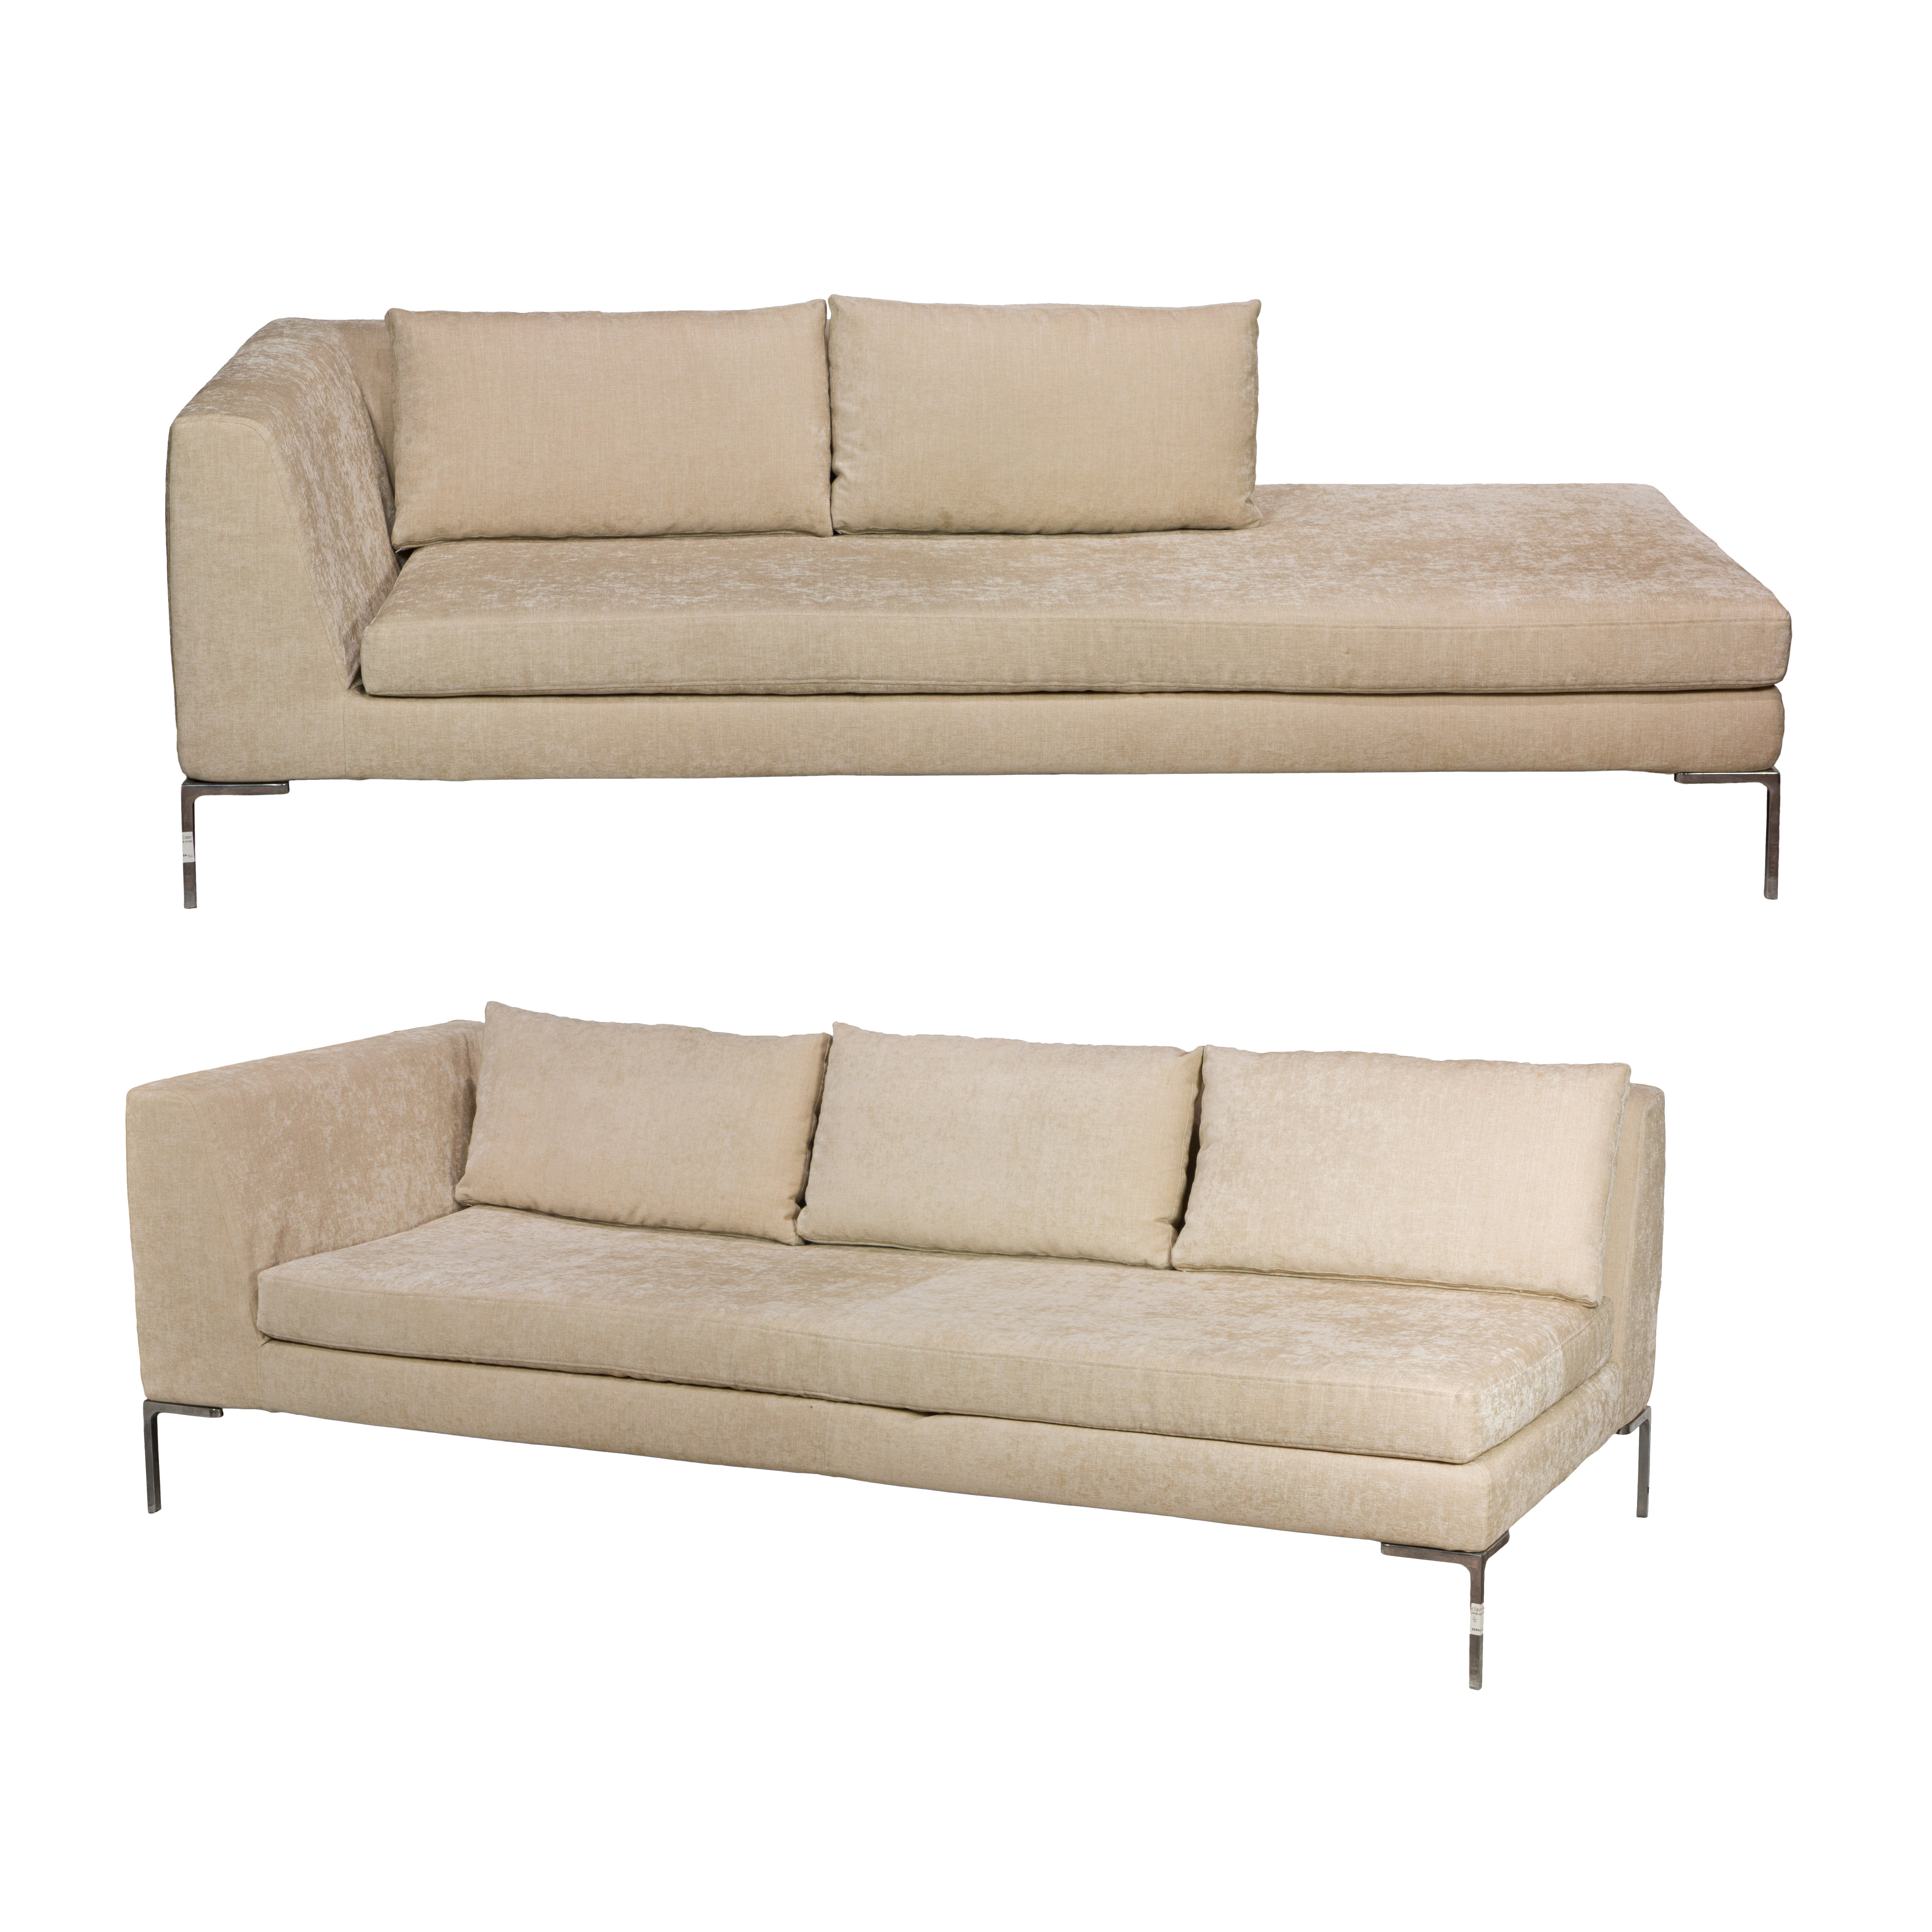 ANTONIO CITTERIO CHARLES SECTIONAL 3a17f6